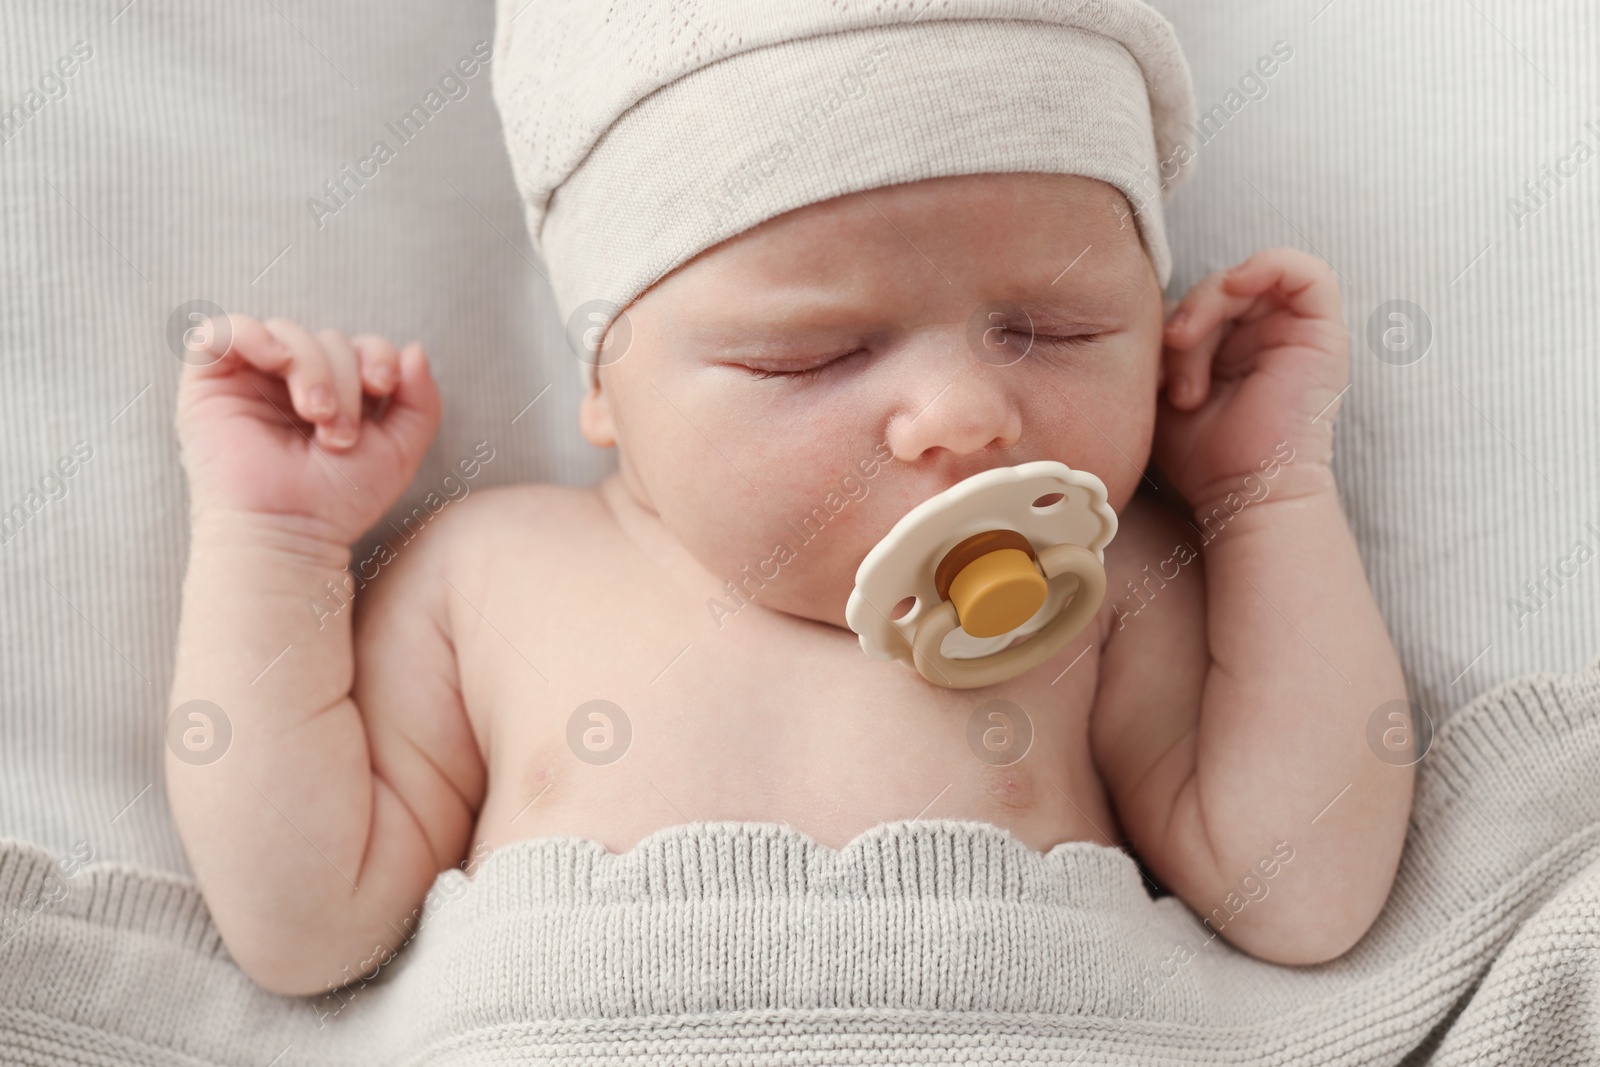 Photo of Adorable little baby with pacifier sleeping in bed, top view